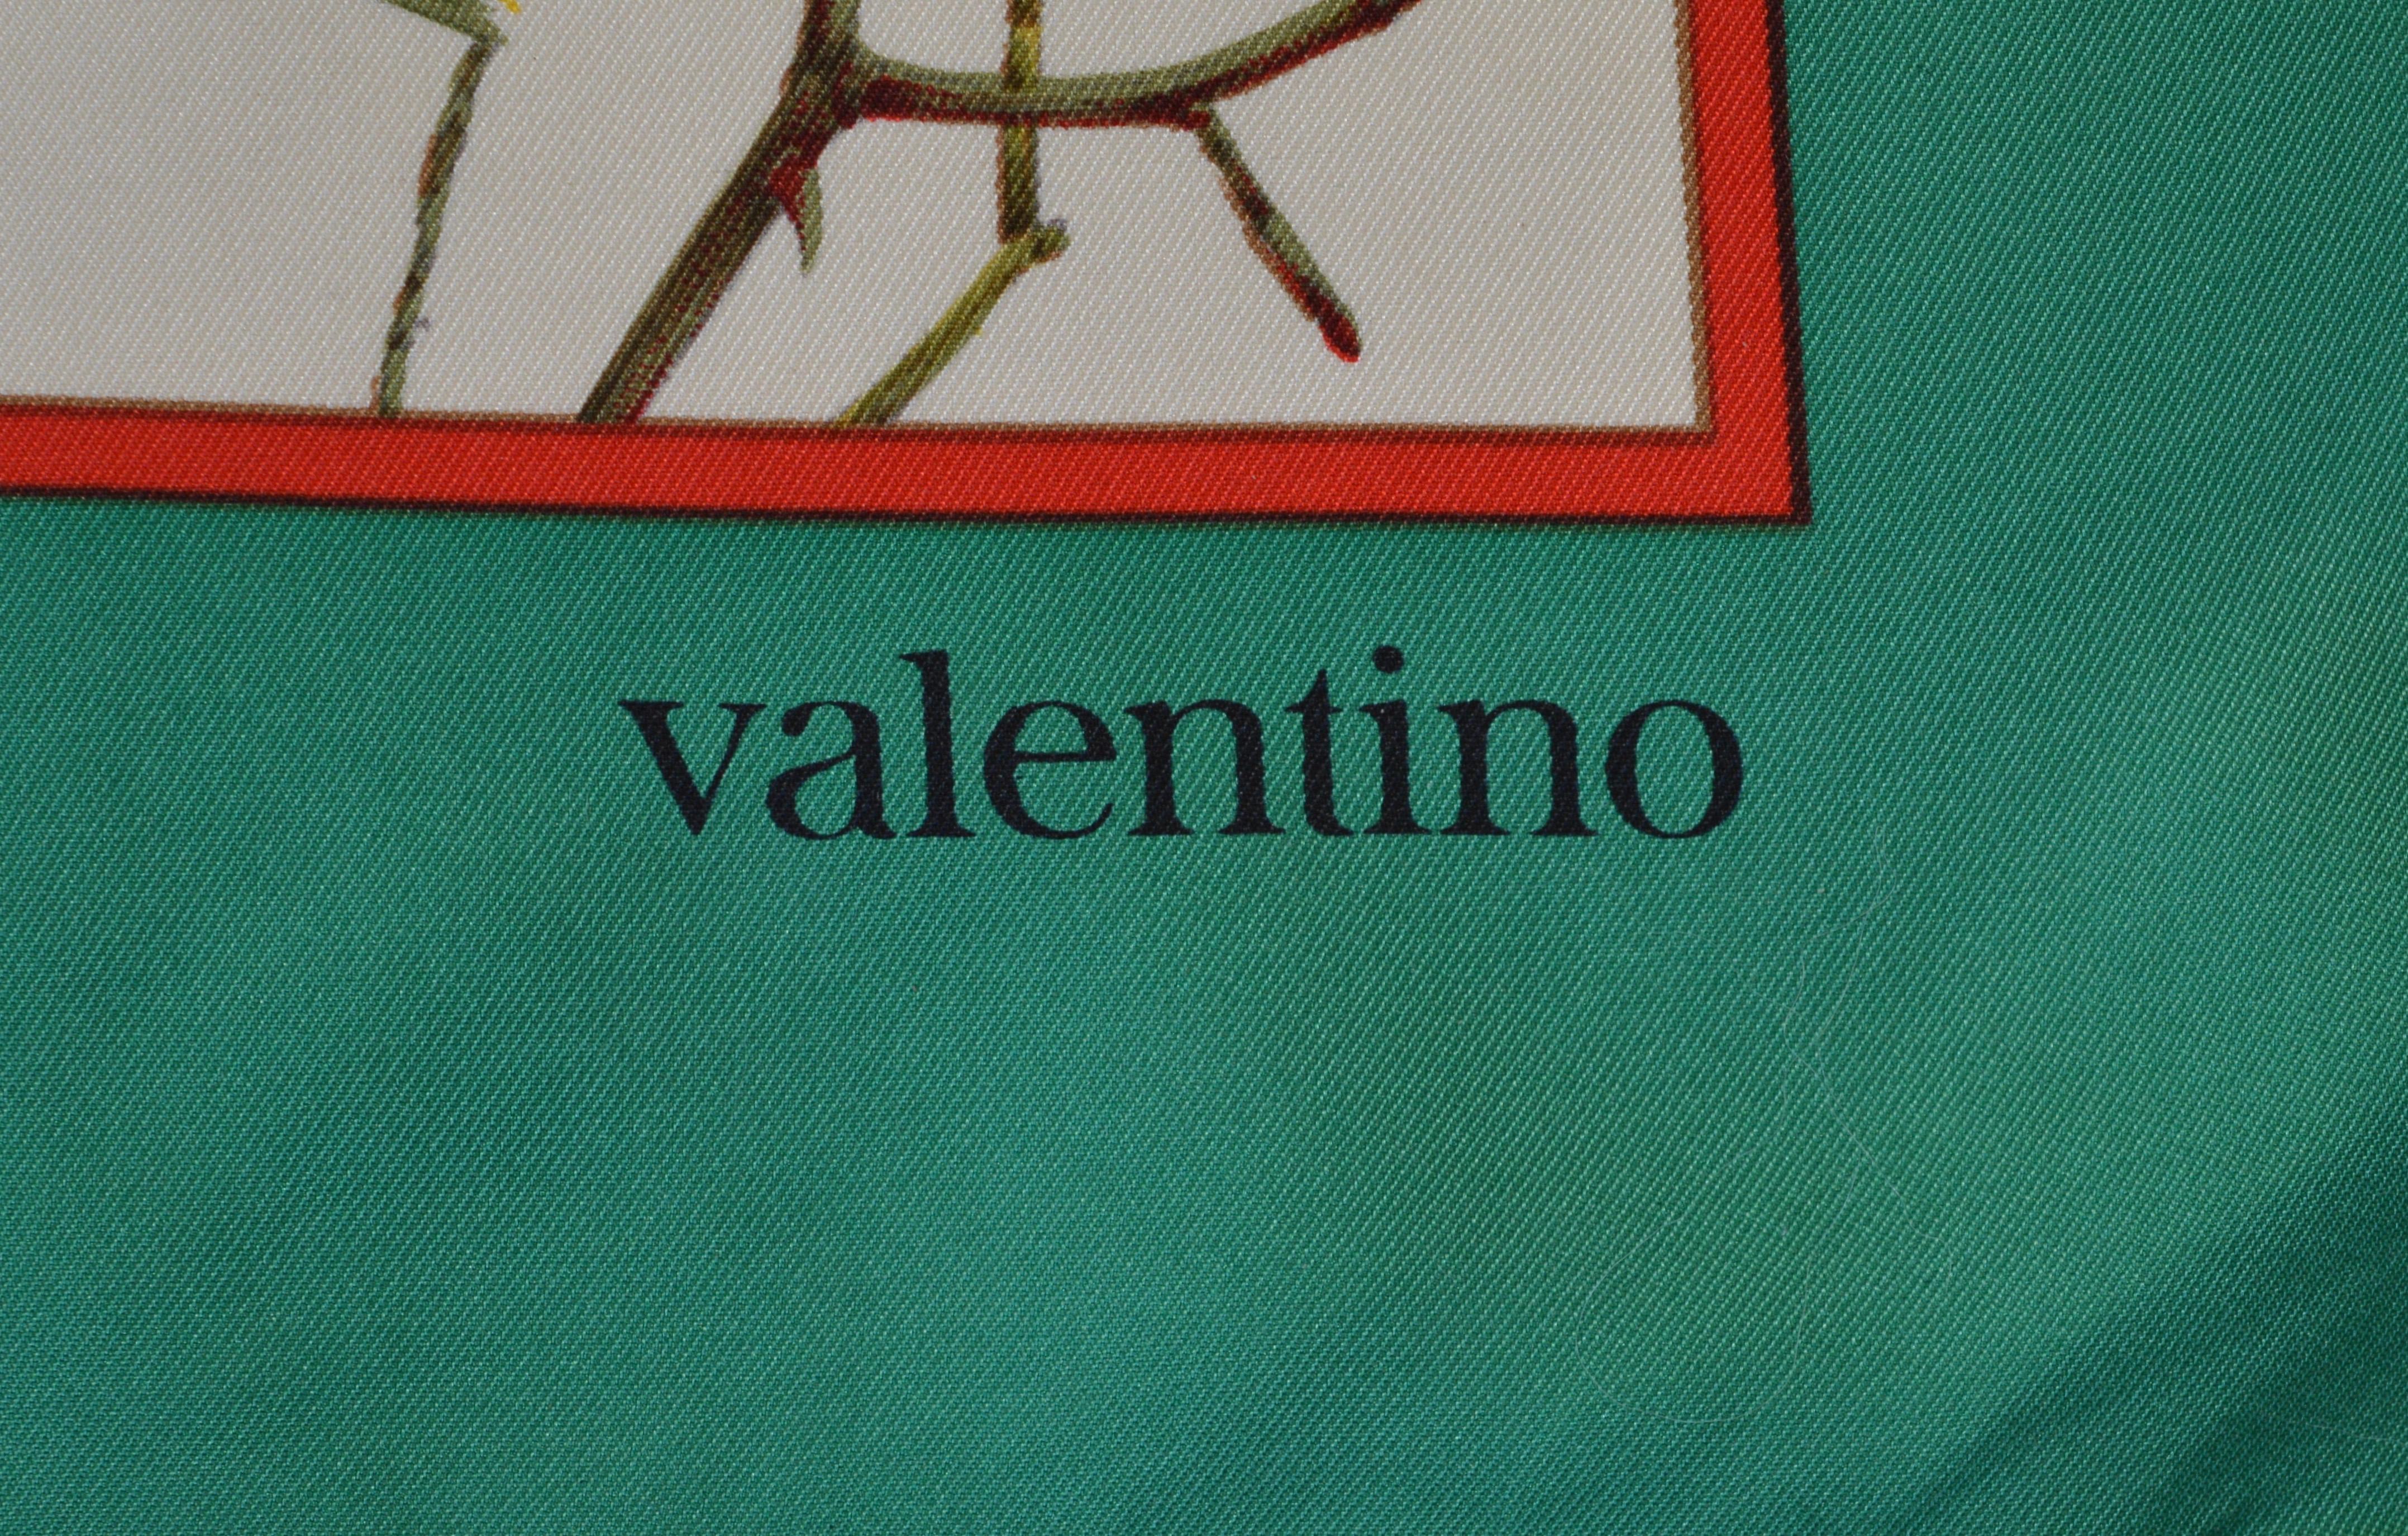 An elegant Valentino silk scarf of autumnal foilage with a grass green and brilliant red border. 
Signed Valentino in the print and handrolled edge.